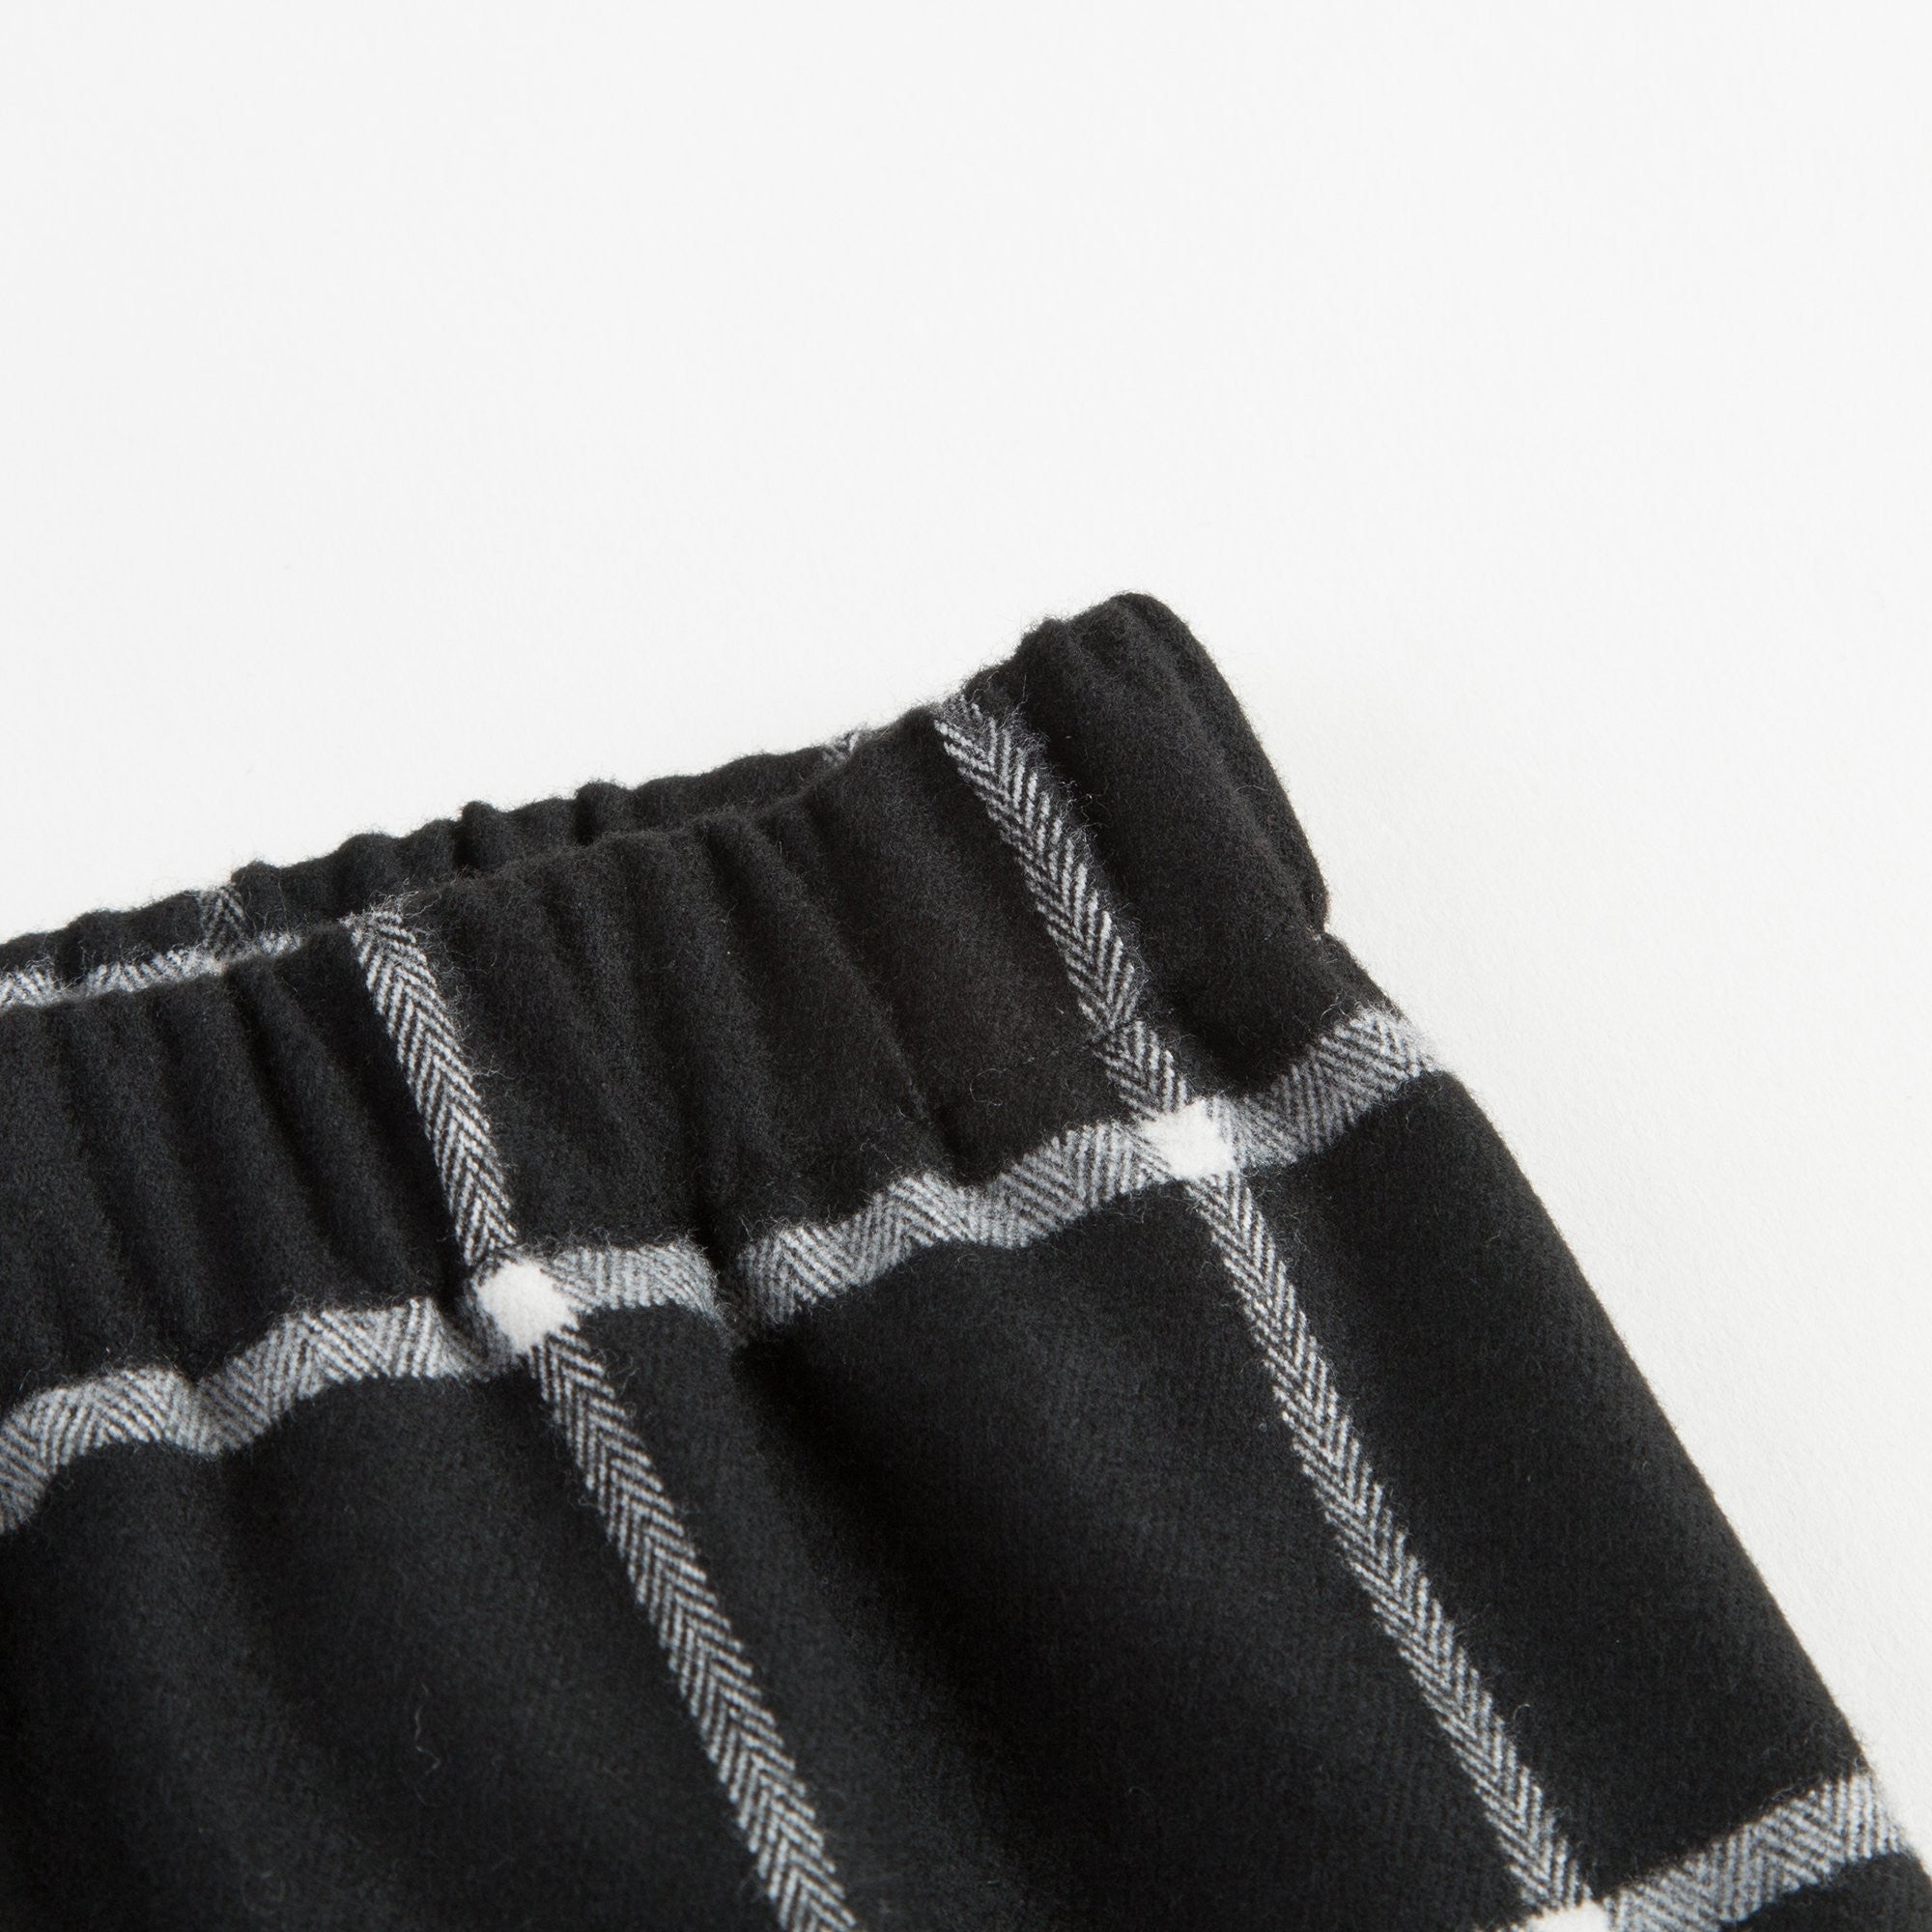 Girls Black Checked Trousers